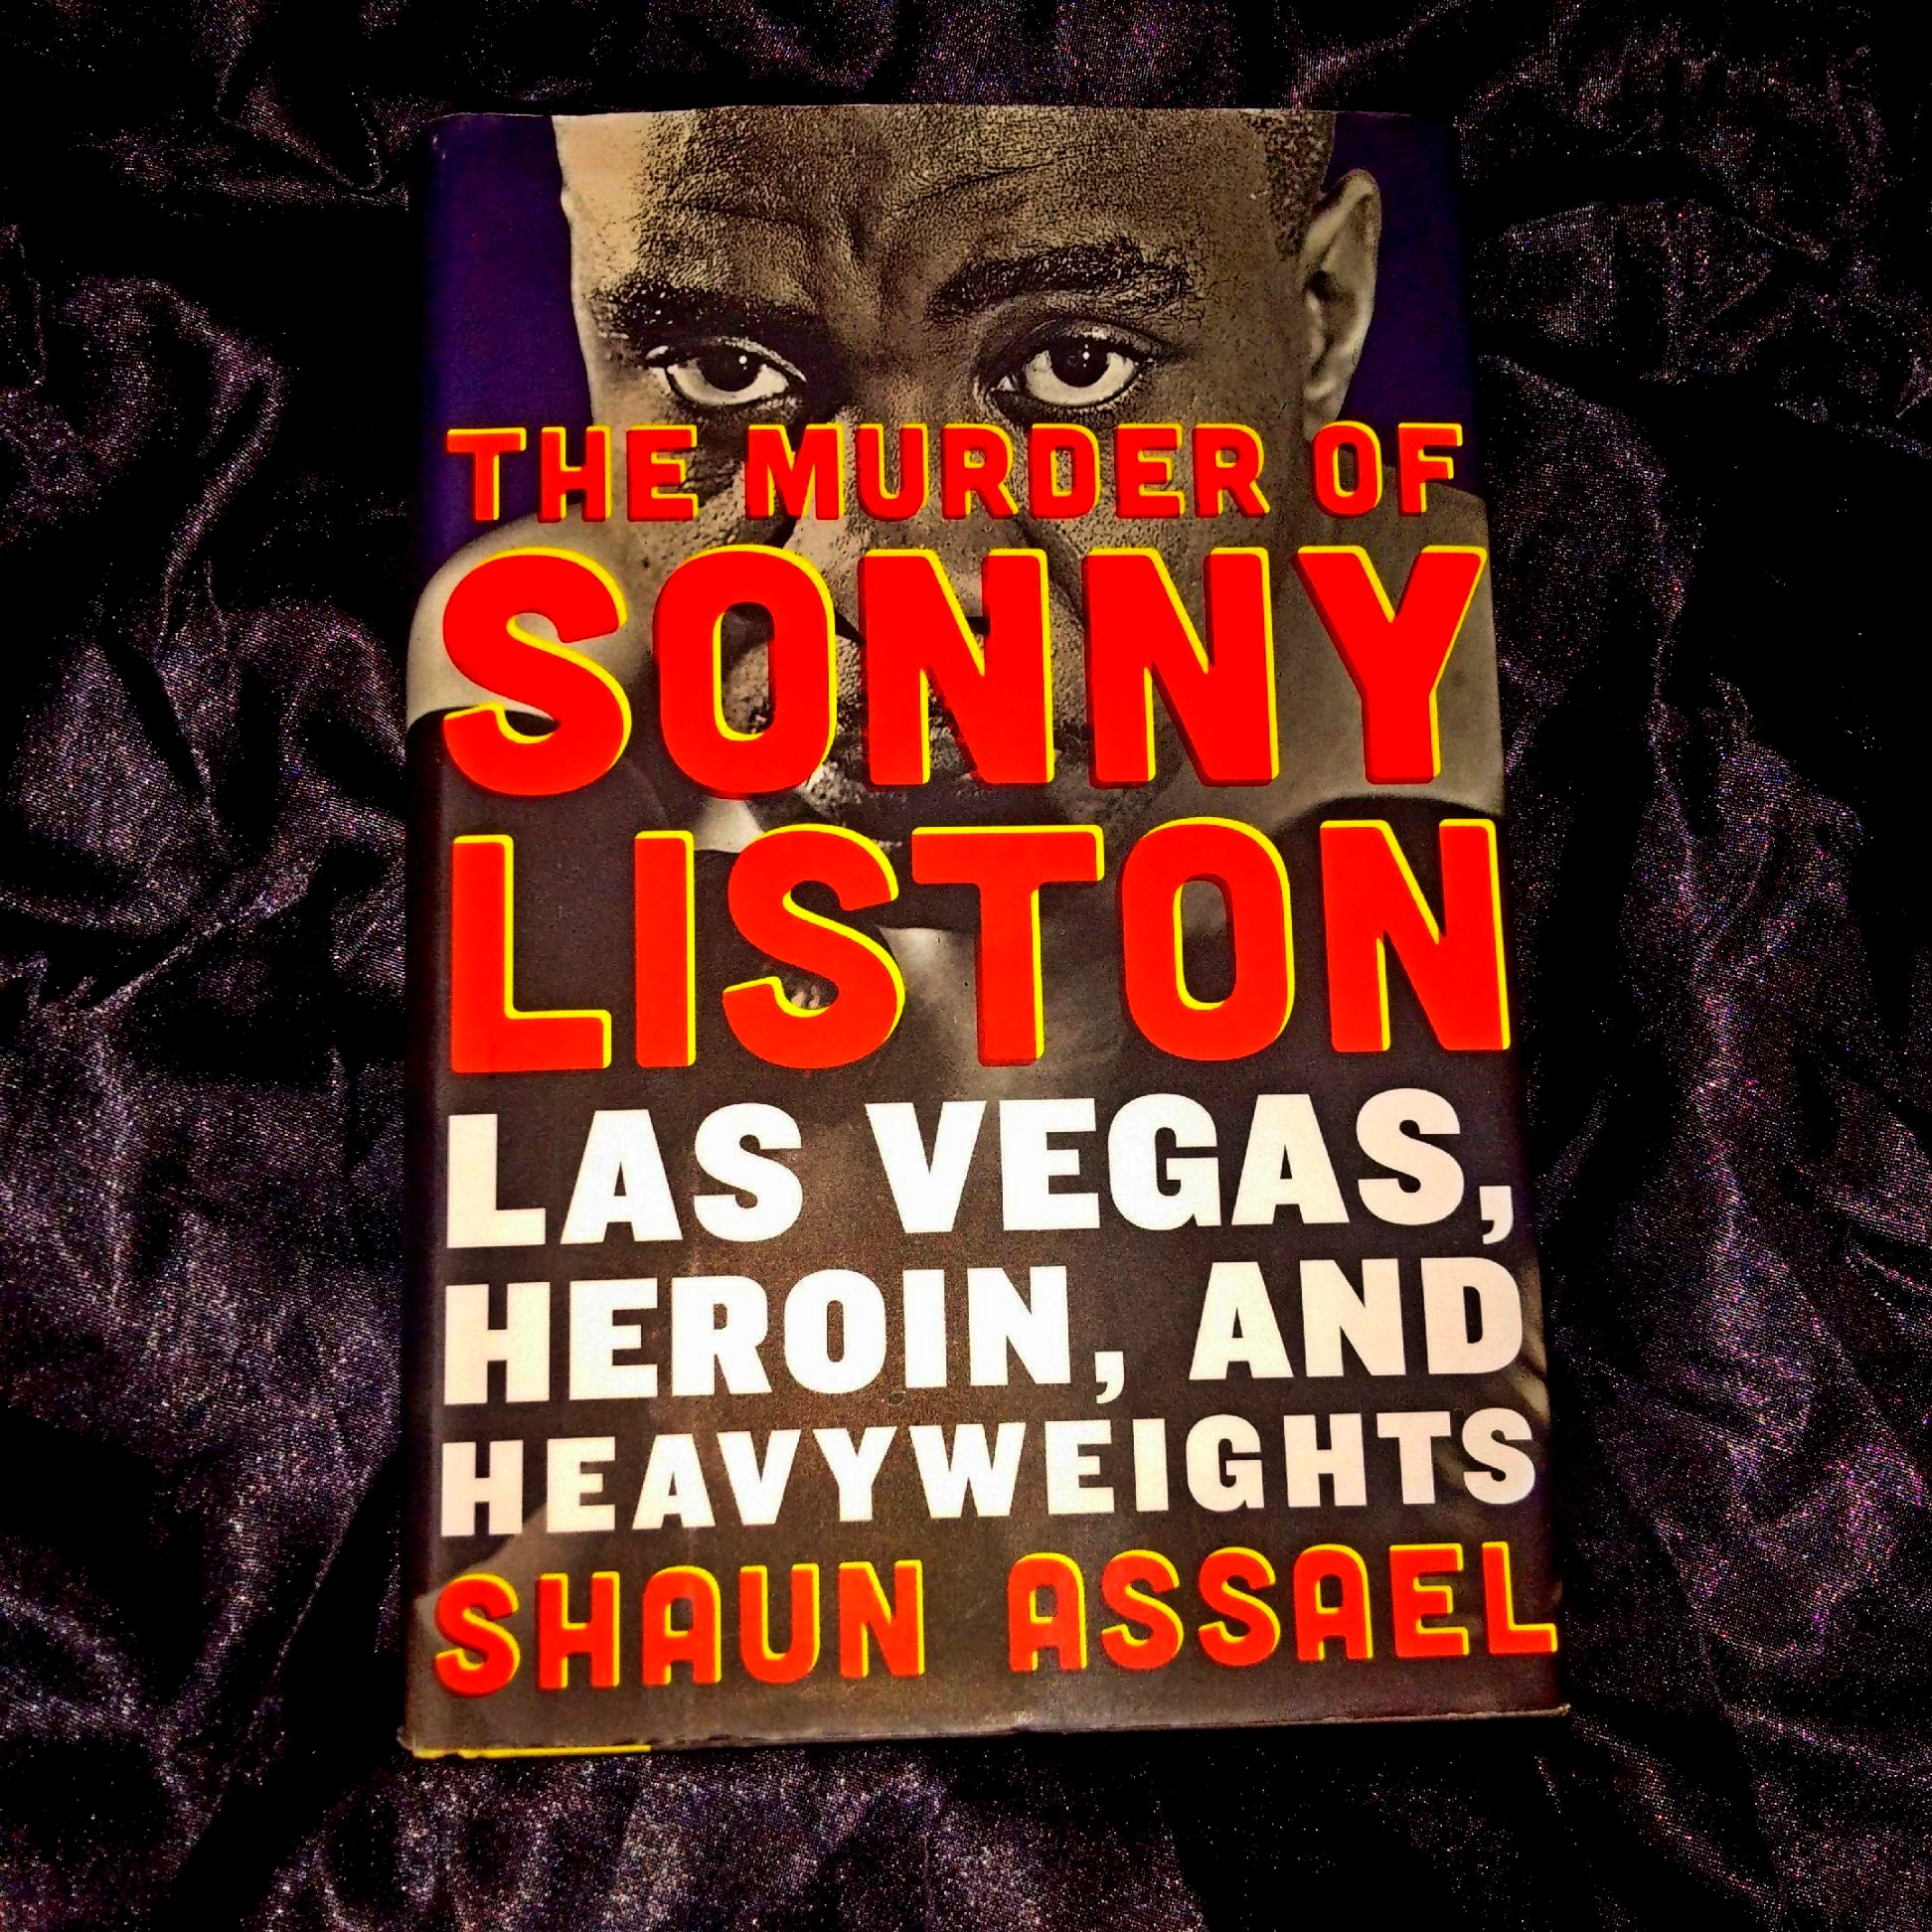 A Great Literary Piece On The Life Of Sonny Liston And The Mystery Surrounding His Death